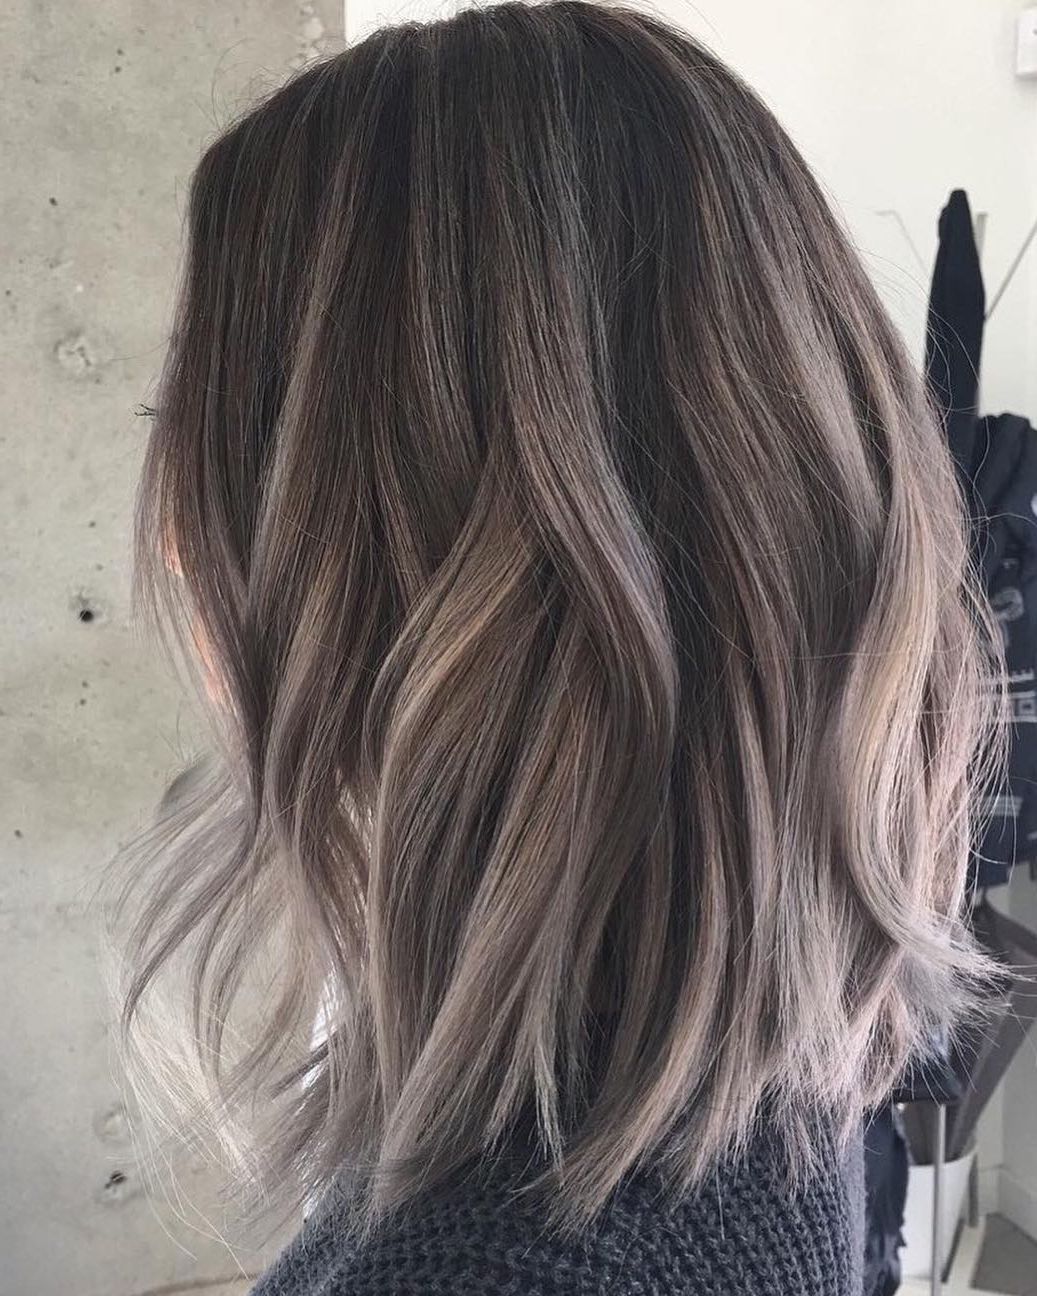 10 Medium Length Hair Color Ideas 2019 In Best And Newest Medium Haircuts For Salt And Pepper Hair (View 8 of 20)